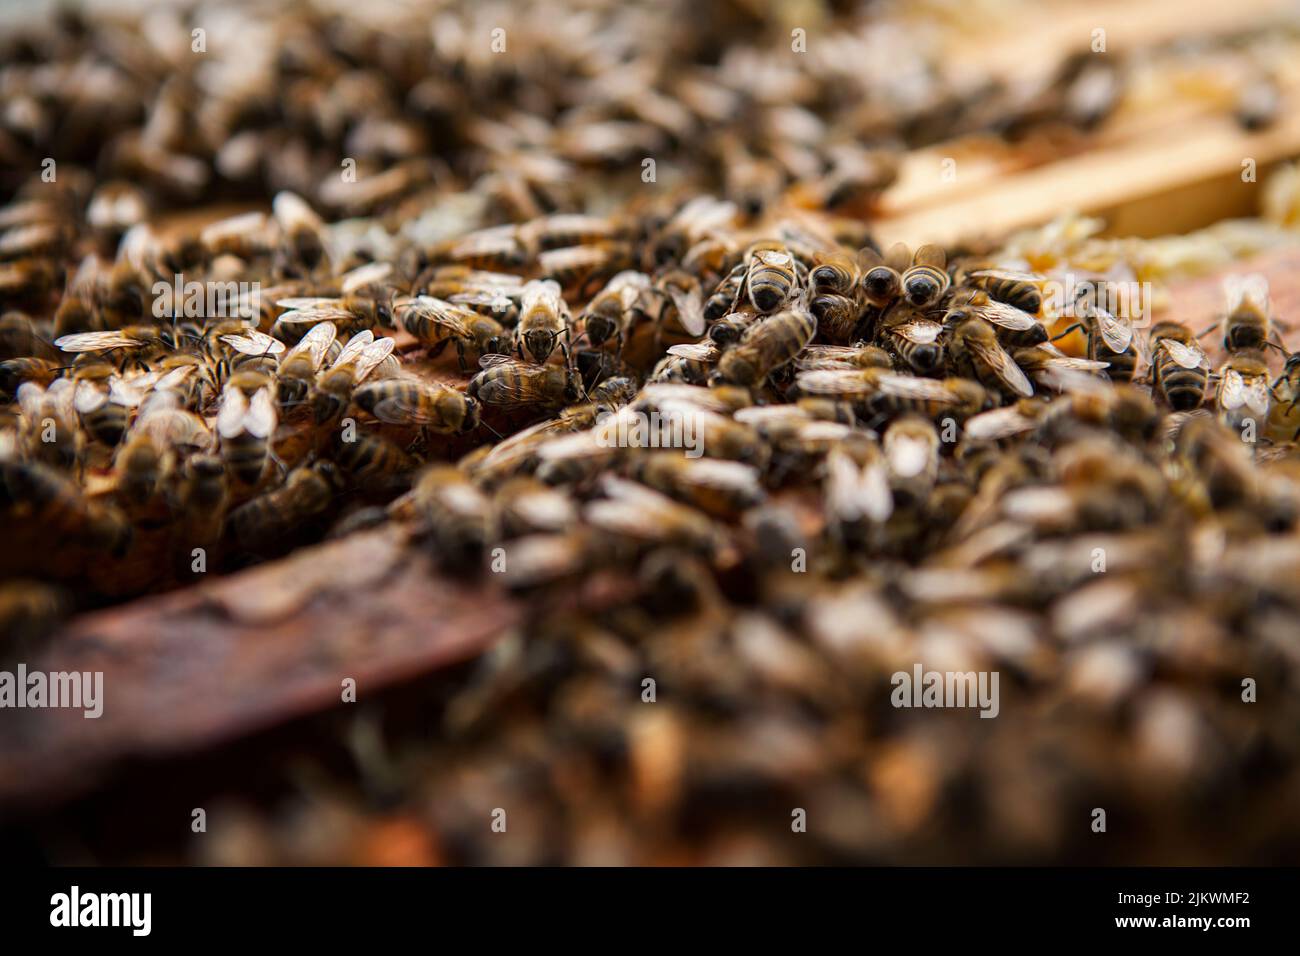 Harvesting honey from a beekeeper in France. Stock Photo